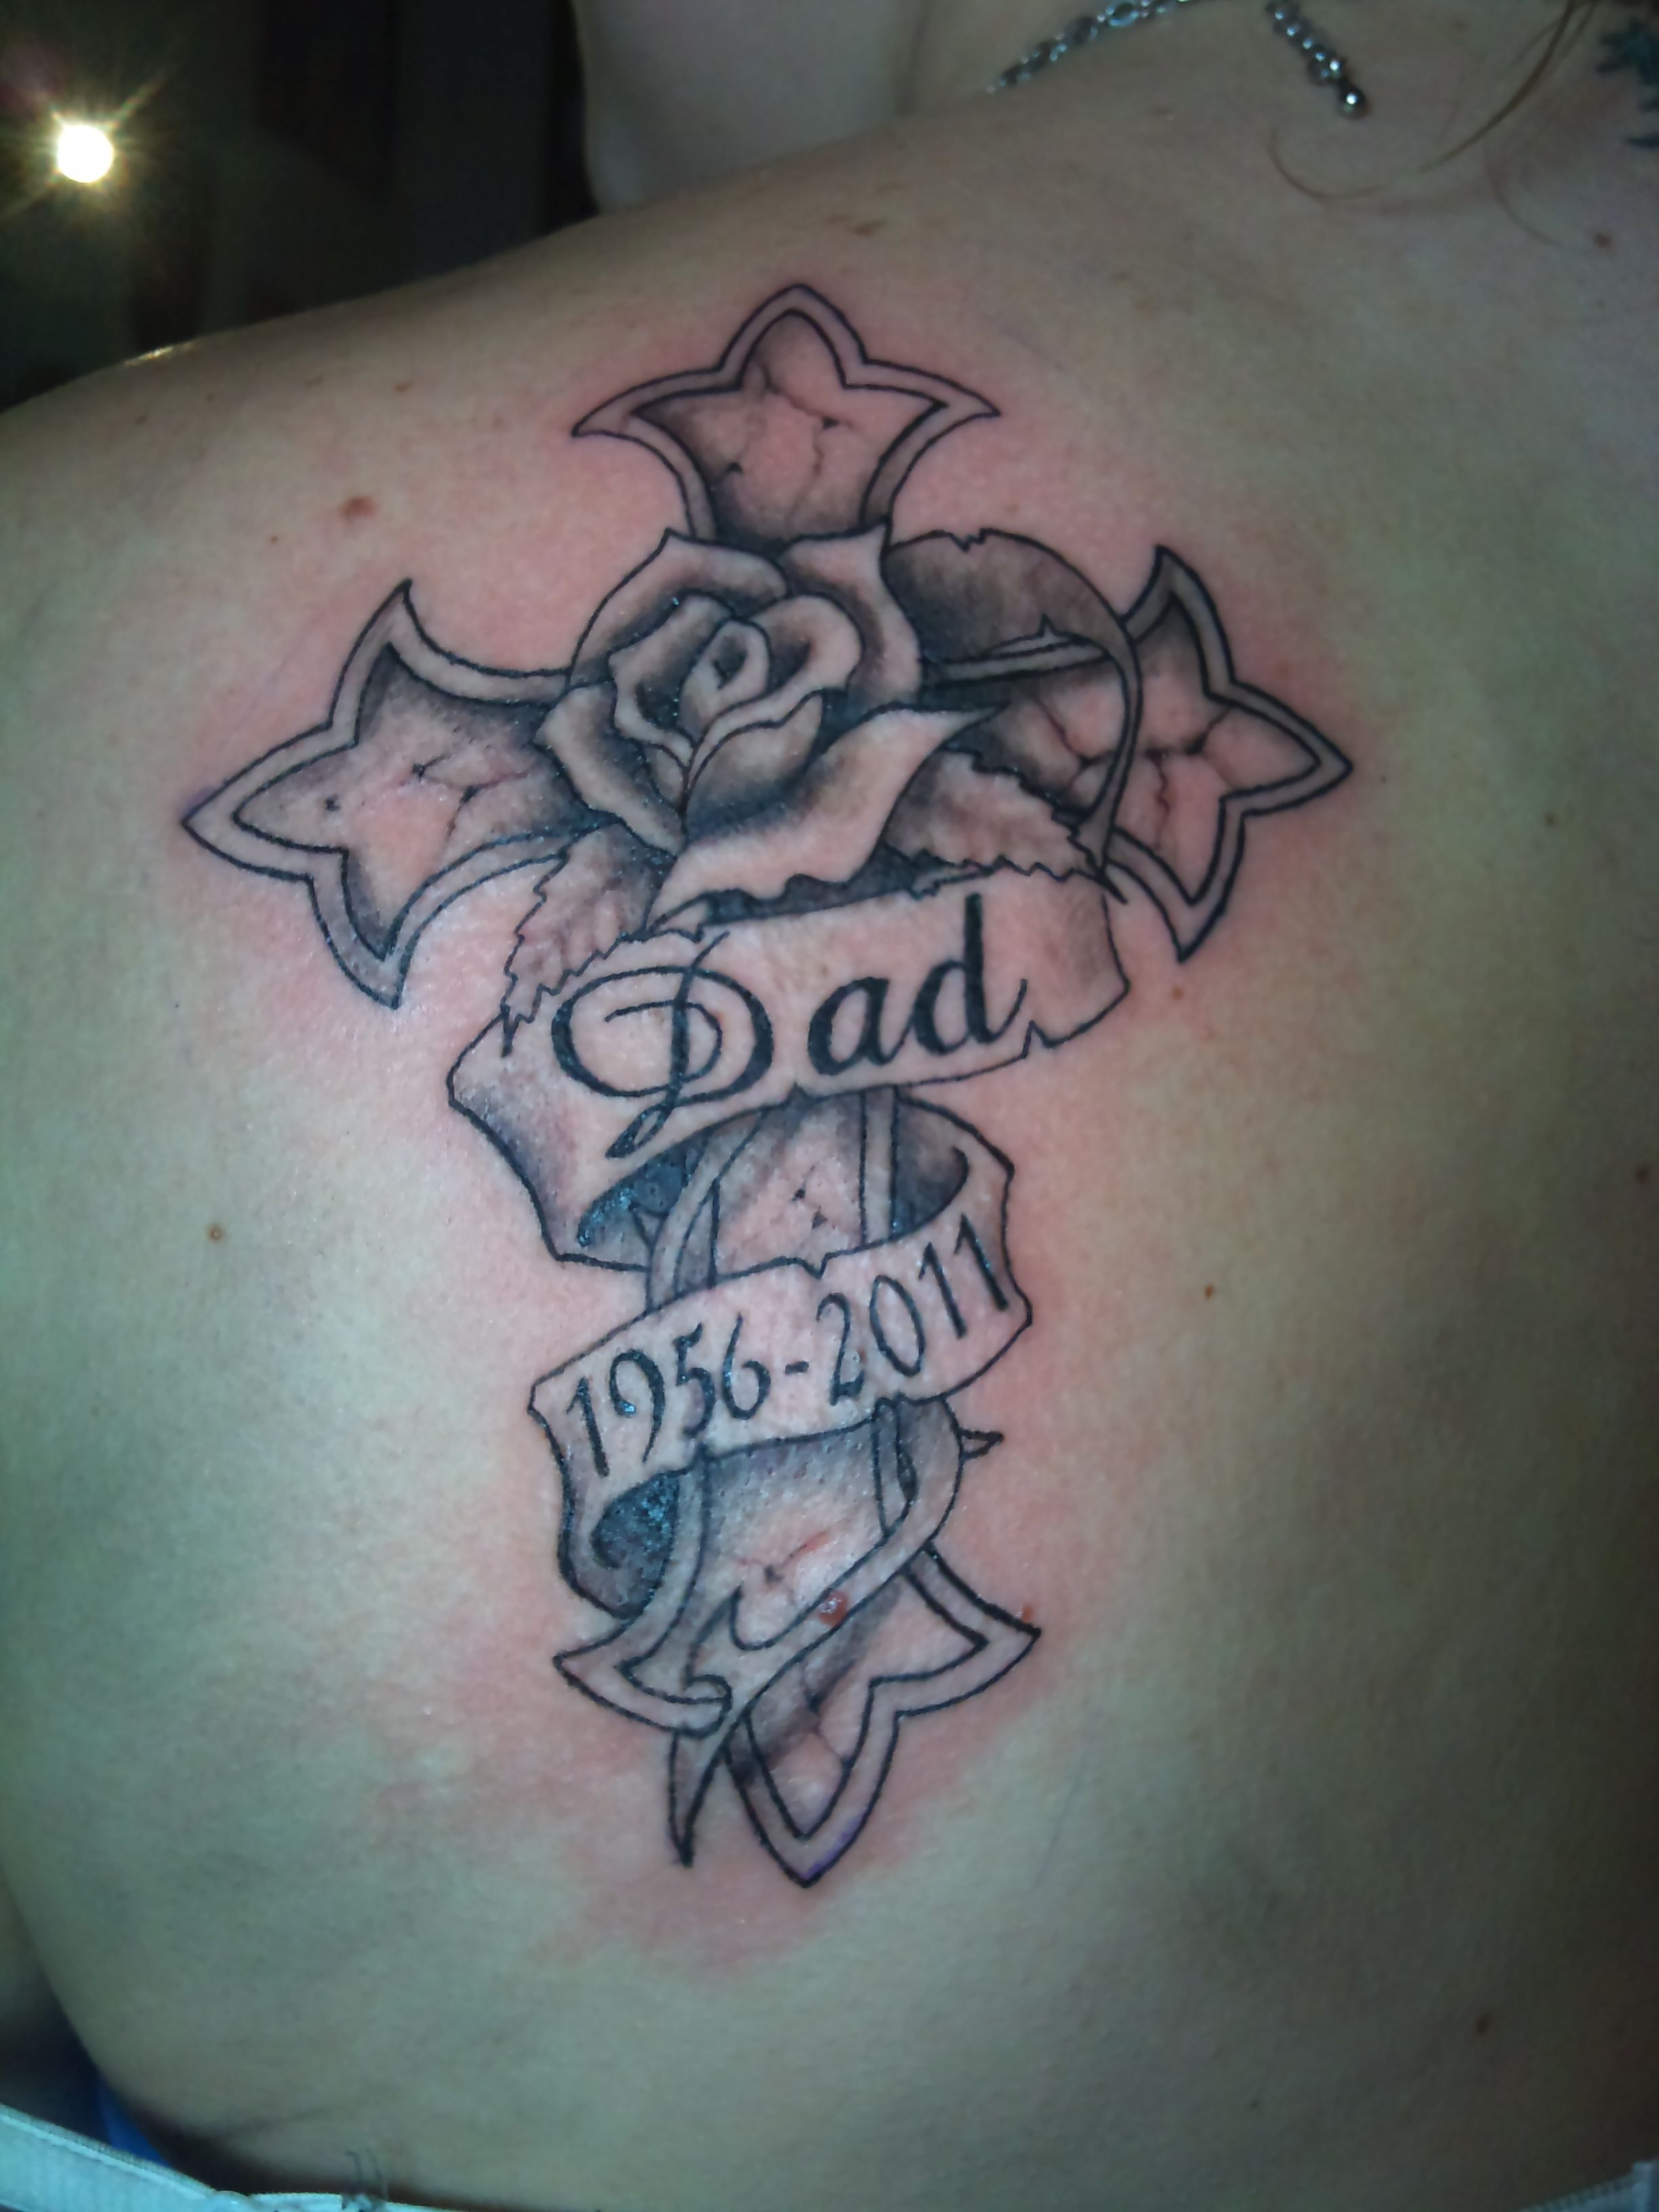 Cross Tattoos With Banners Designs And Ideas Tattoo Memorial regarding dimensions 2448 X 3264